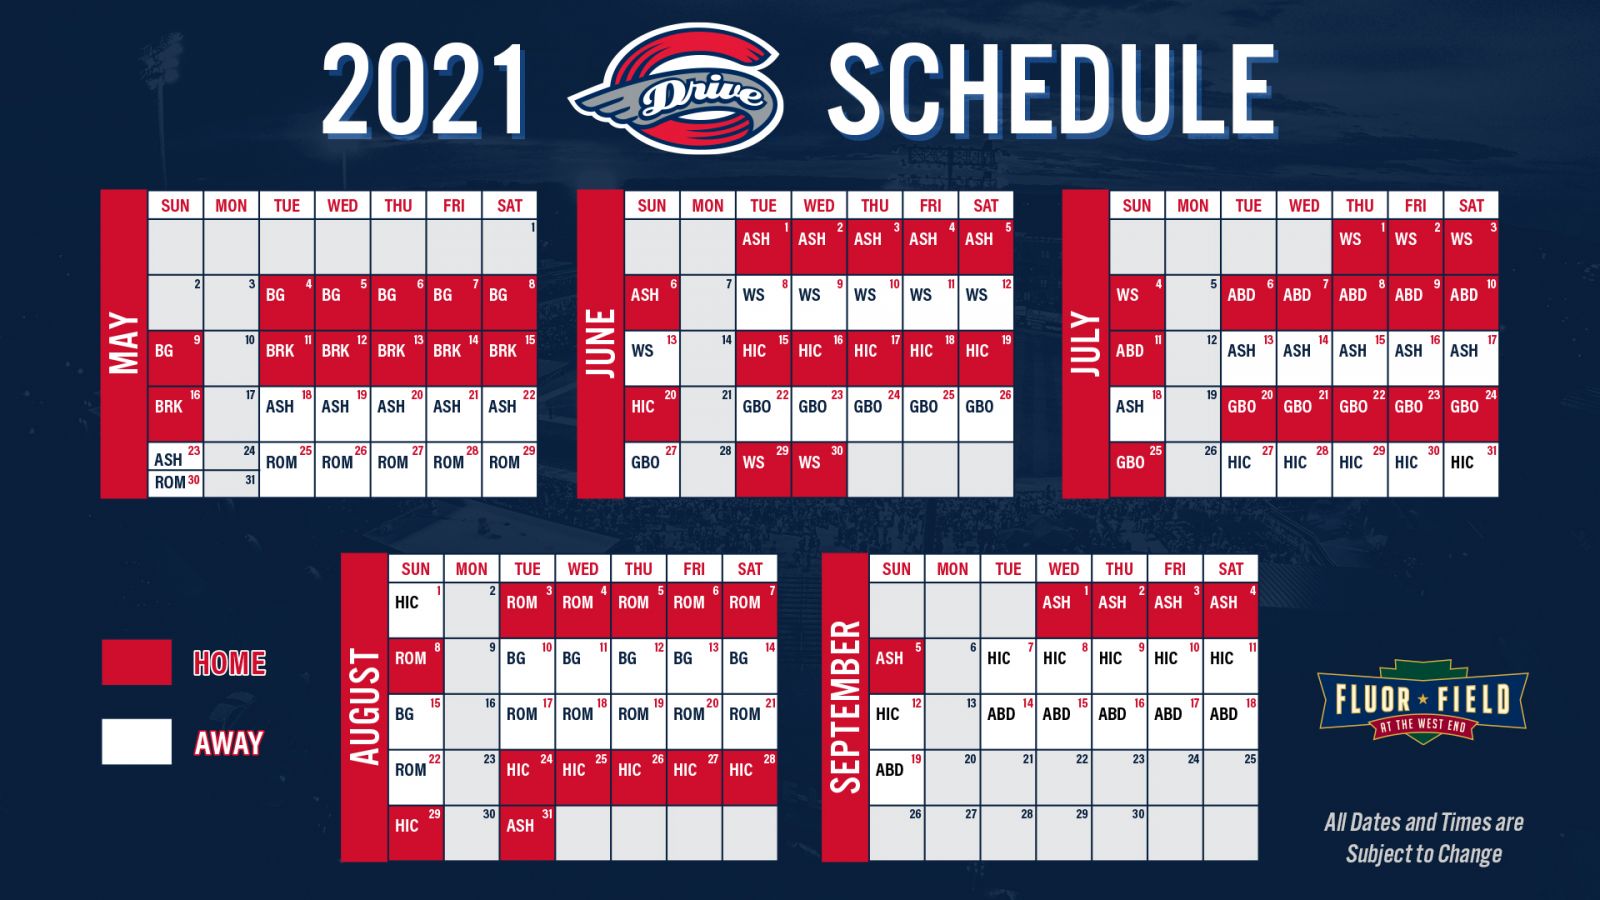 The Greenville Drive's season will include 120 games with an equal amount of home and away matches. (Graphic/Provided)